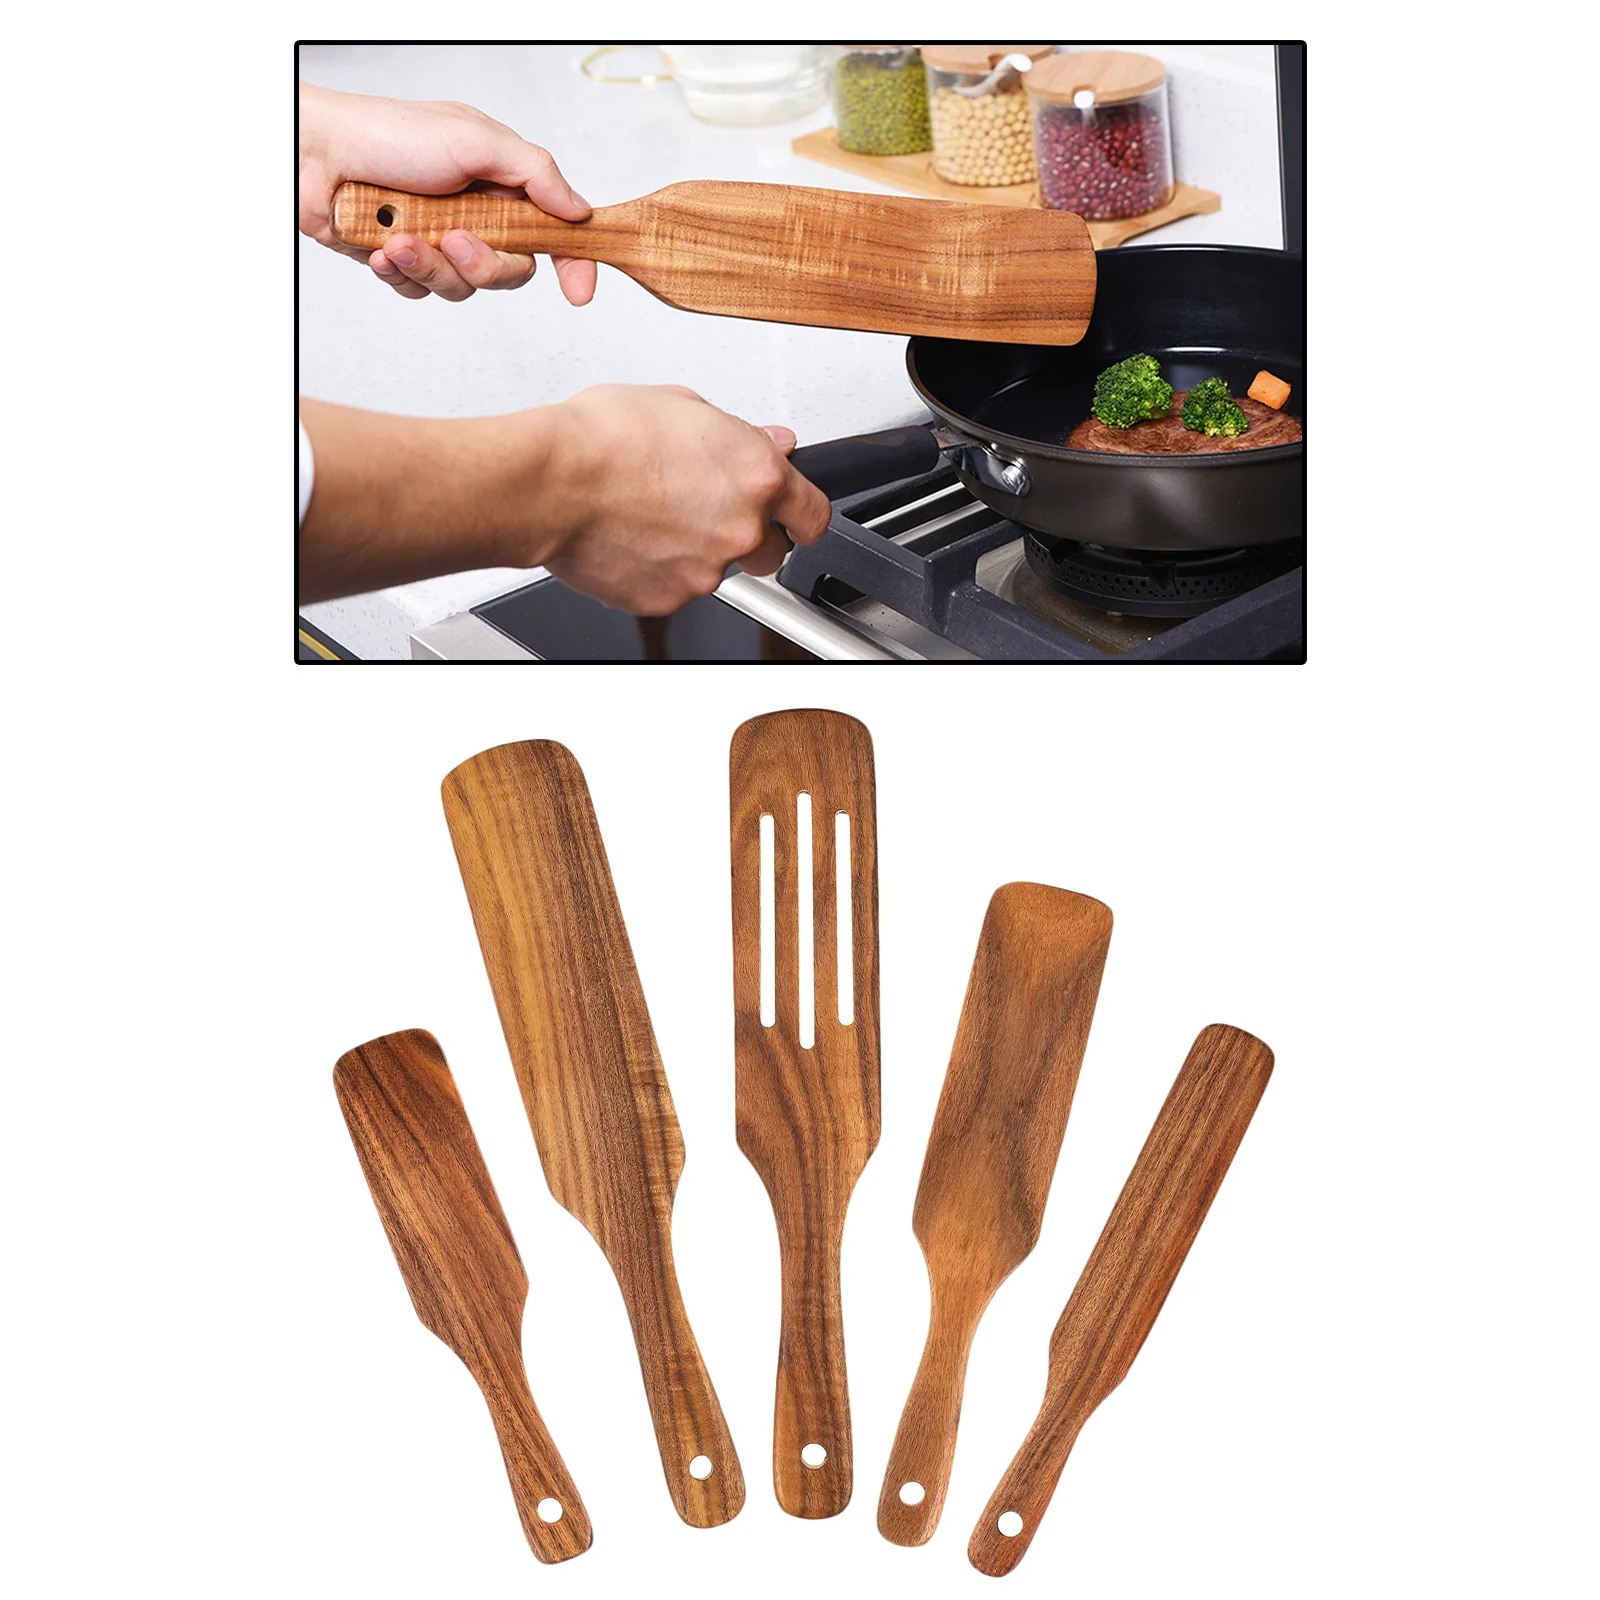 5x Slotted Heat Resistant Spatulas Spoons Set Utensils Cookware For Stirring